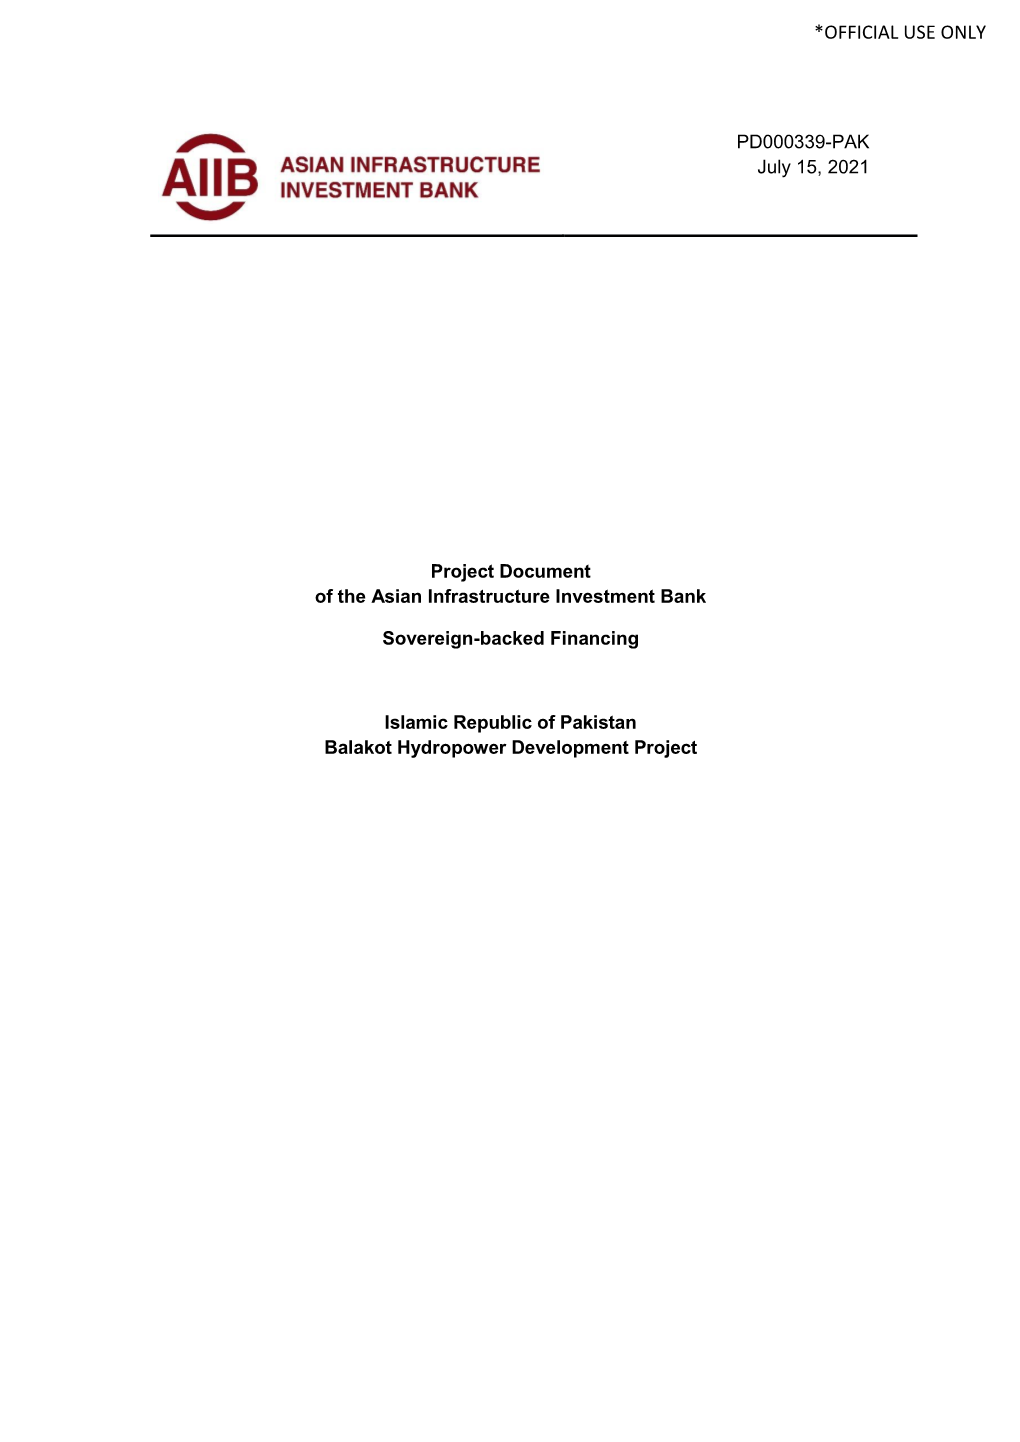 Project Document of the Asian Infrastructure Investment Bank